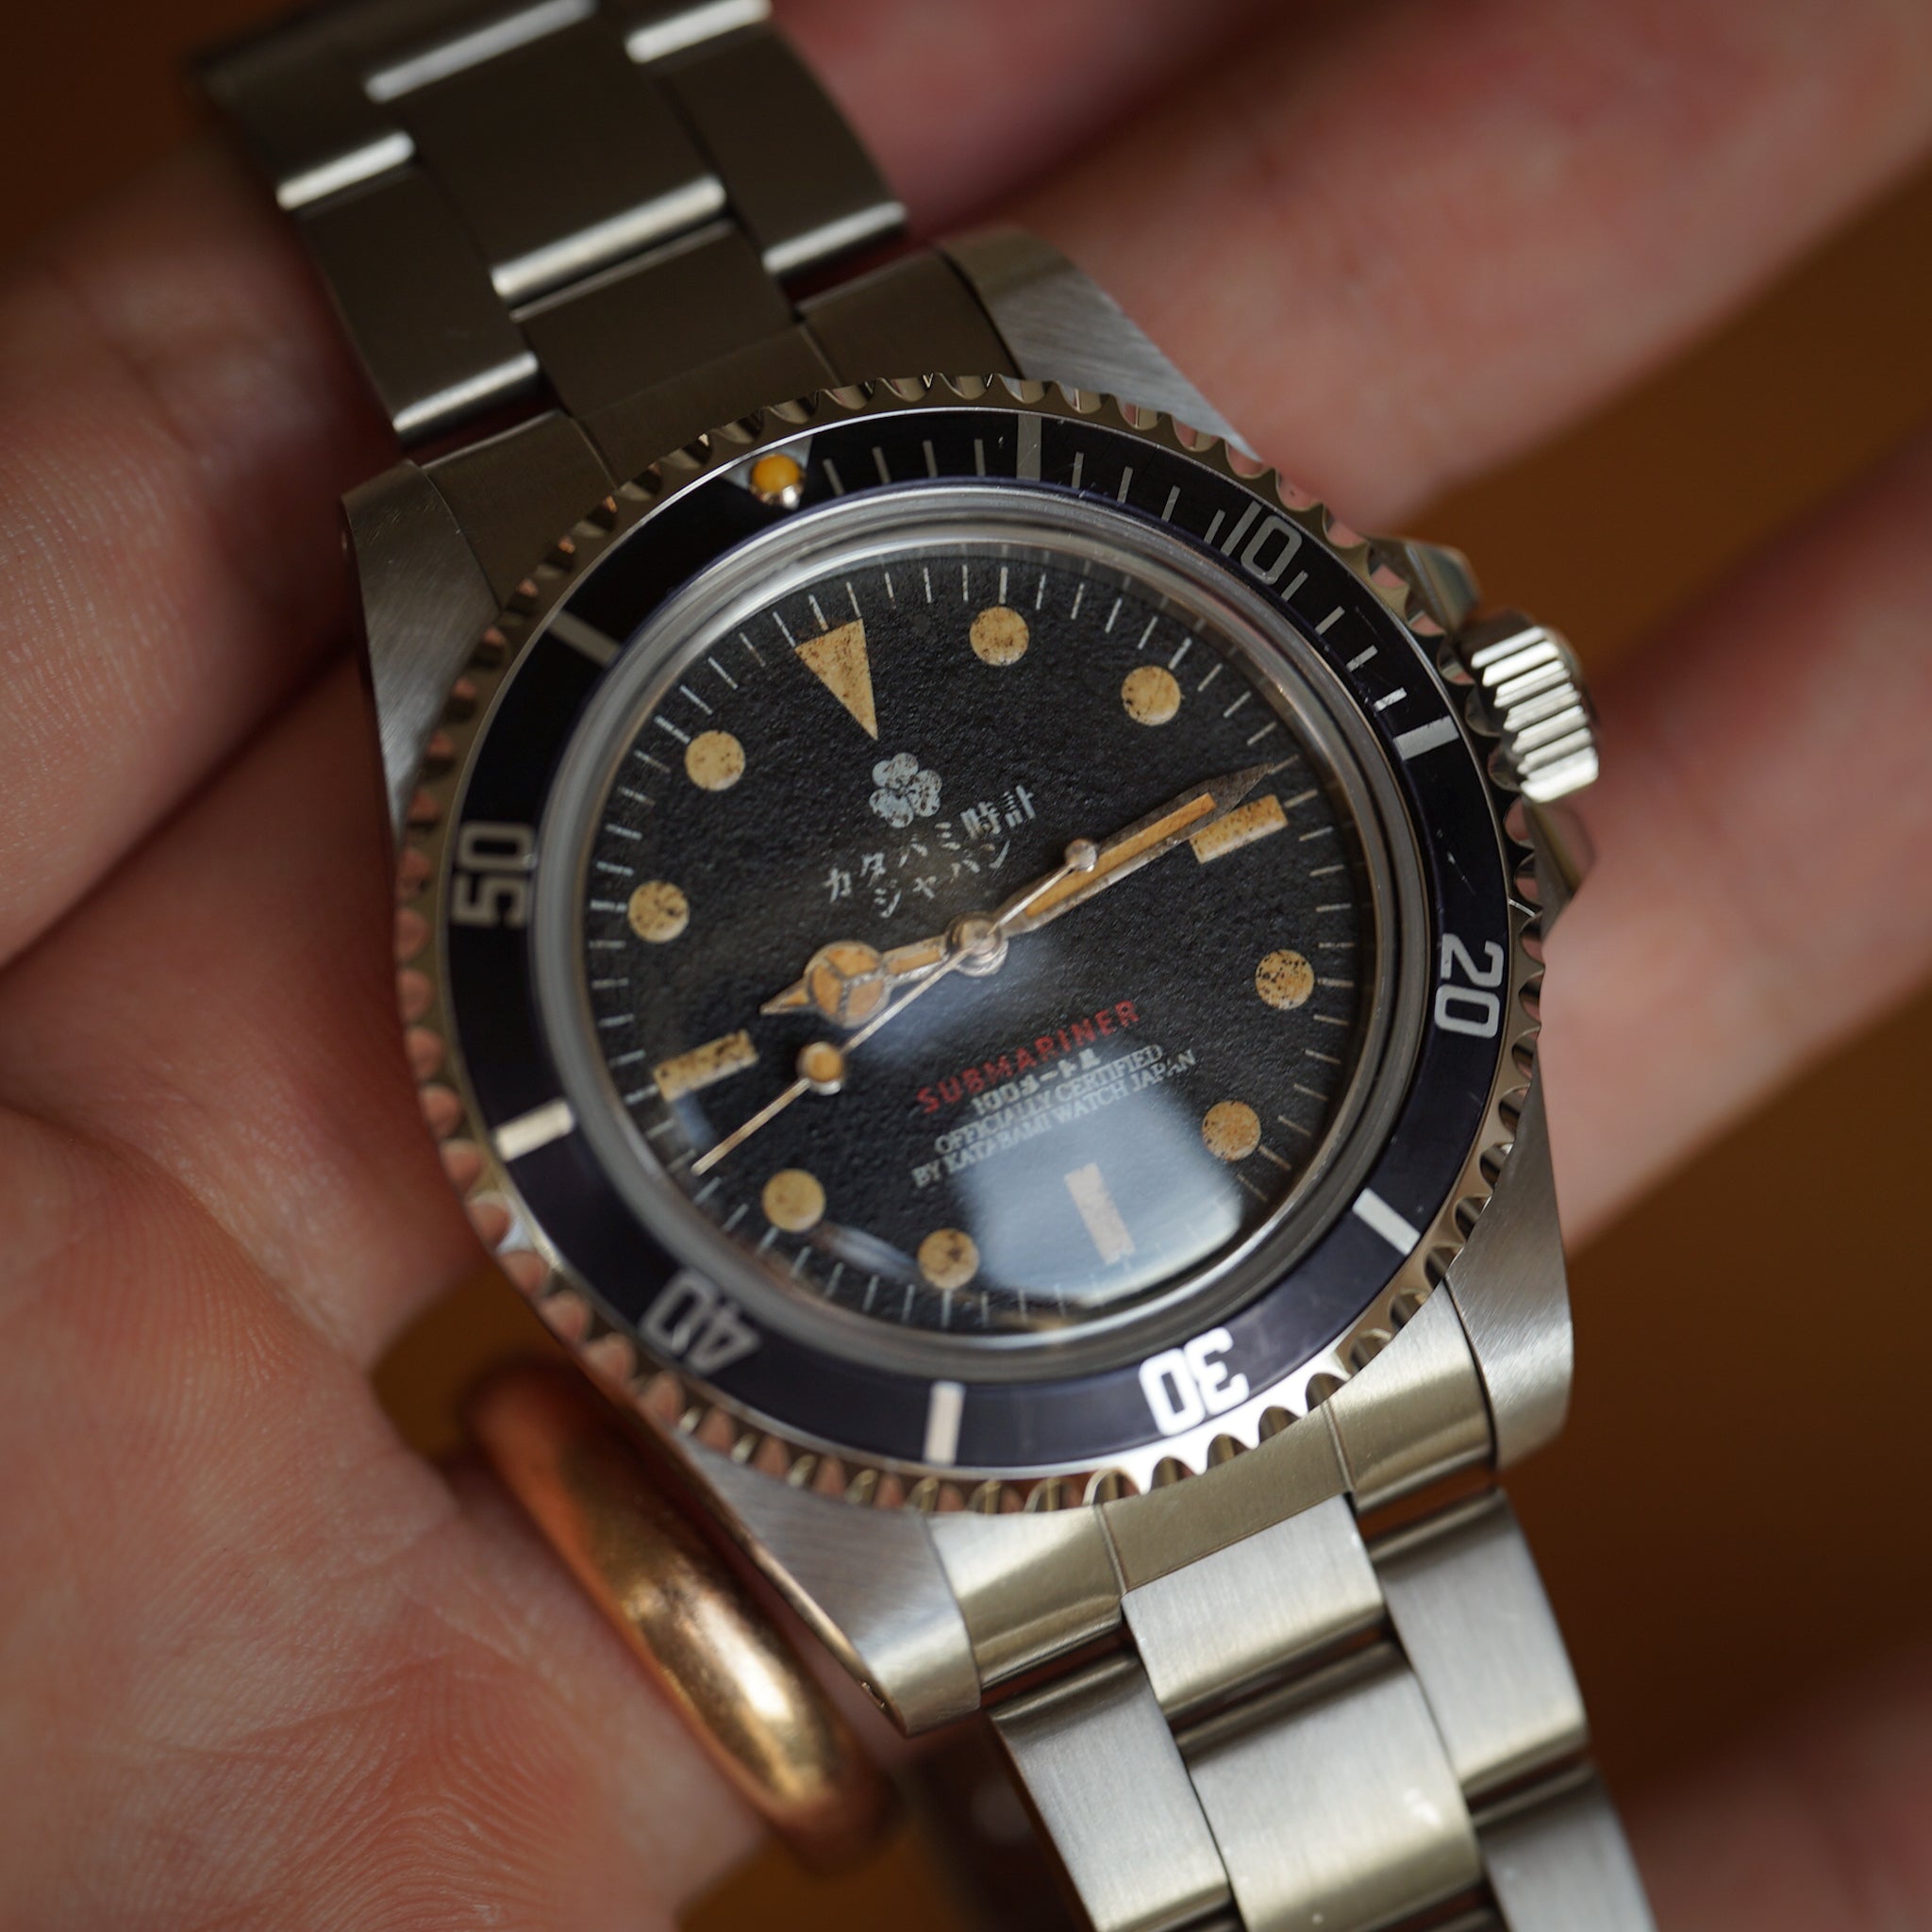 The diver "231"